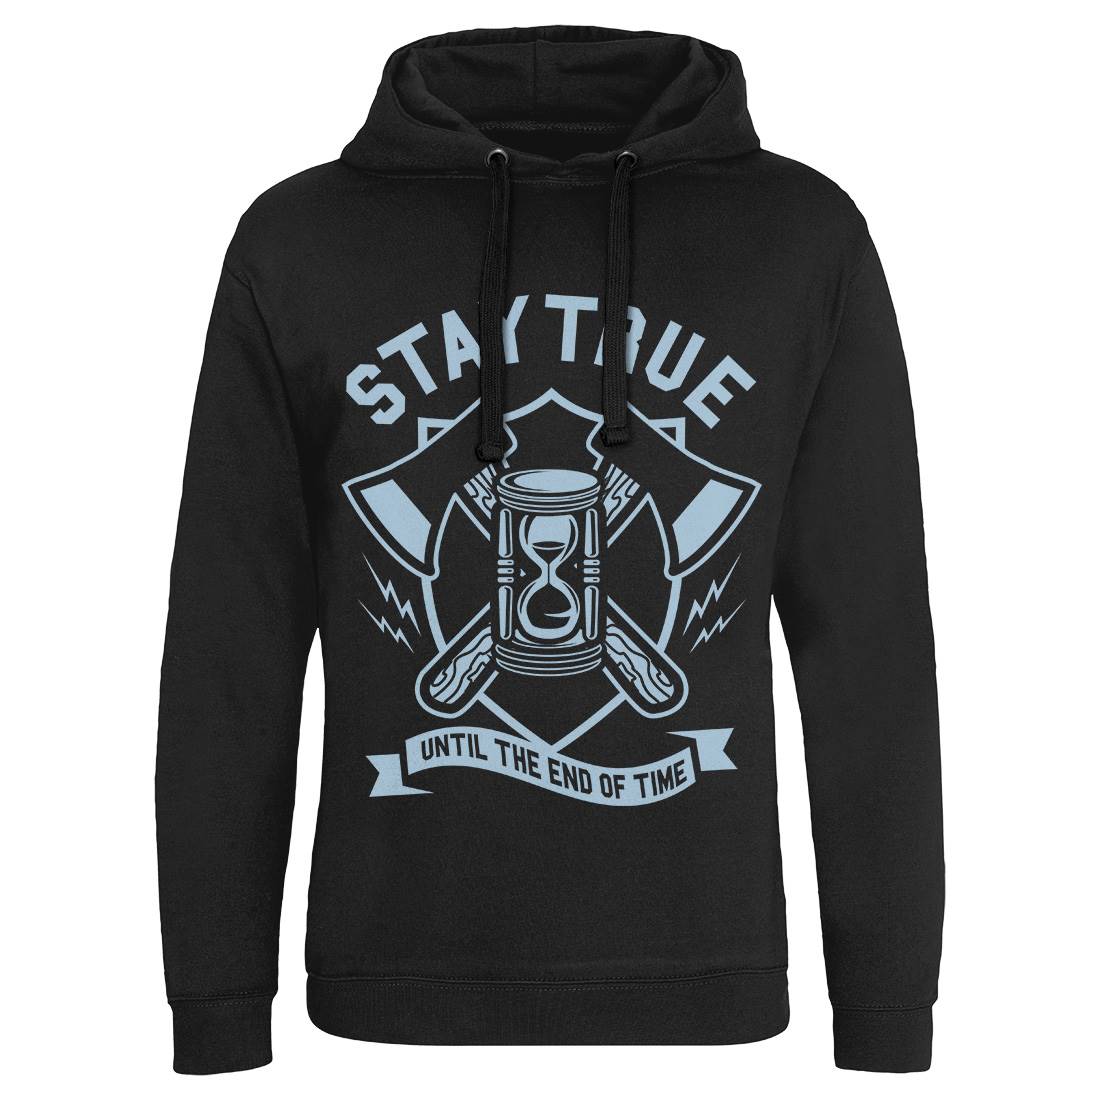 Stay True Mens Hoodie Without Pocket Quotes A285